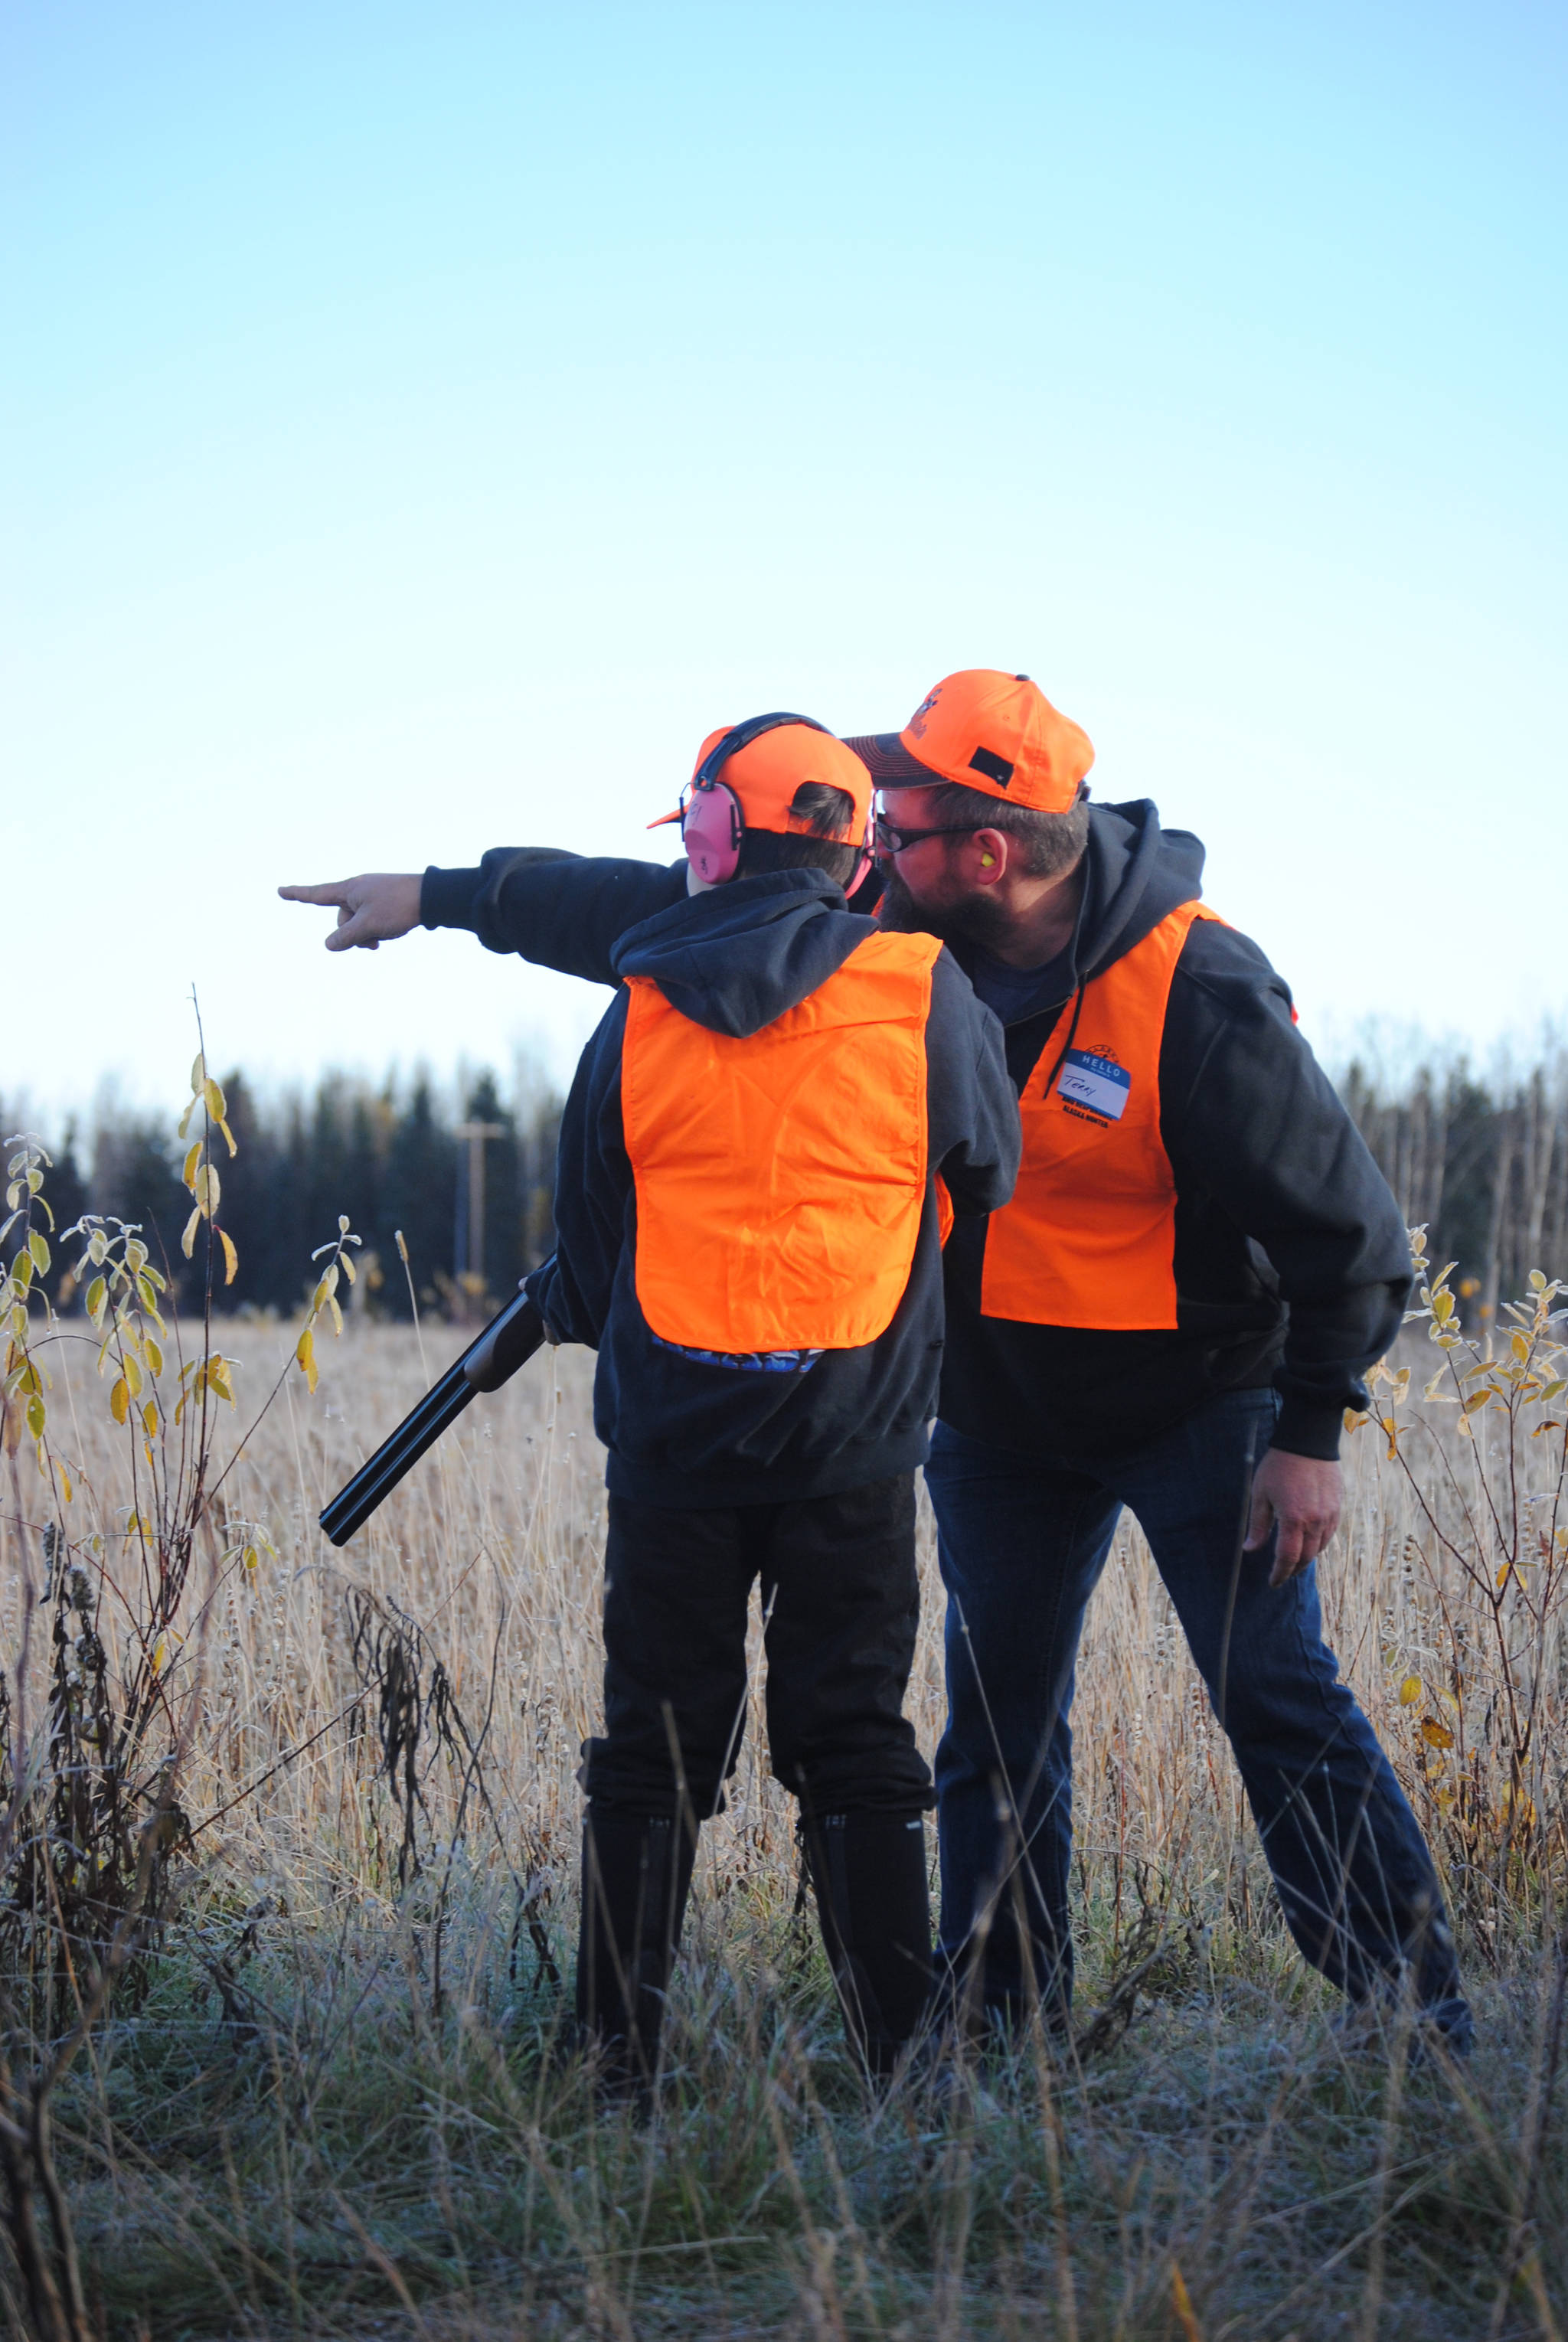 Safari Club International volunteers work closely with participants throughout the day in Funny River, Alaska on Saturday, October 9, 2017 to ensure safety and an understanding of the basics of shooting and hunting. (Photo by Kat Sorensen/Peninsula Clarion)